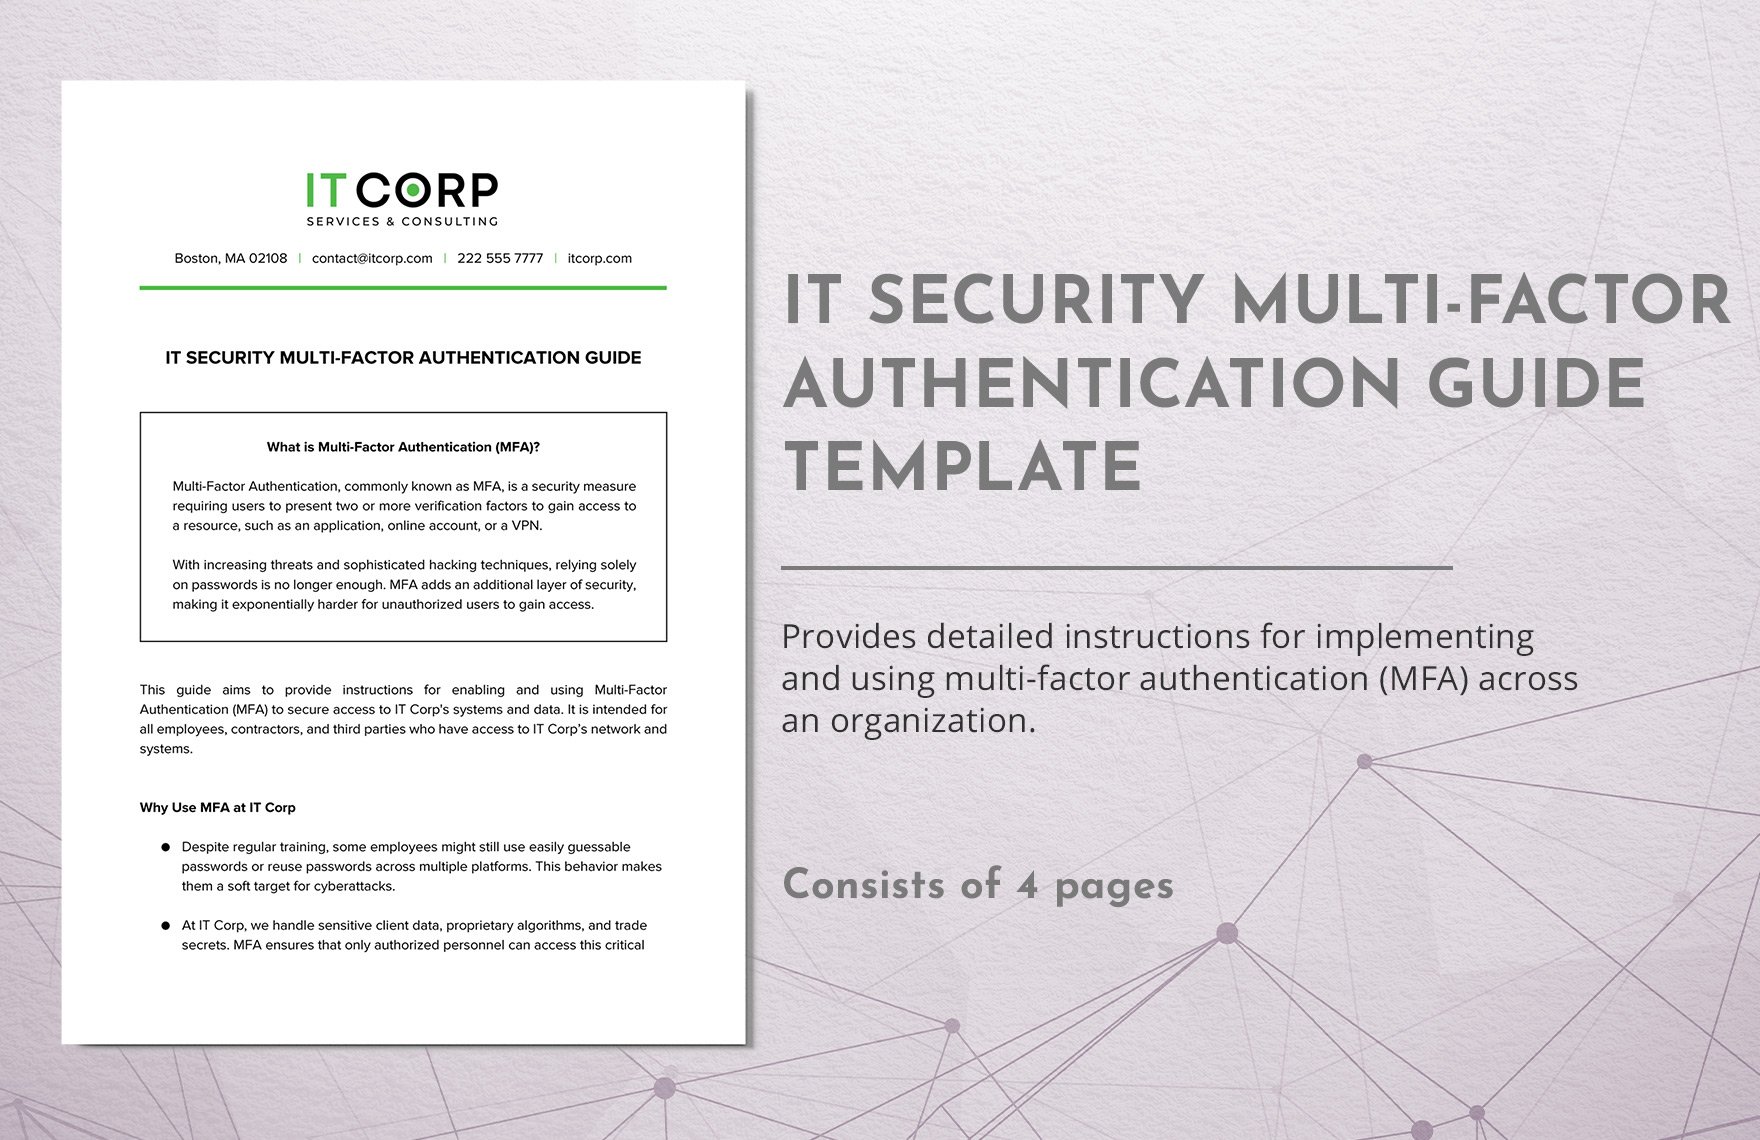 IT Security Multi-Factor Authentication Guide Template